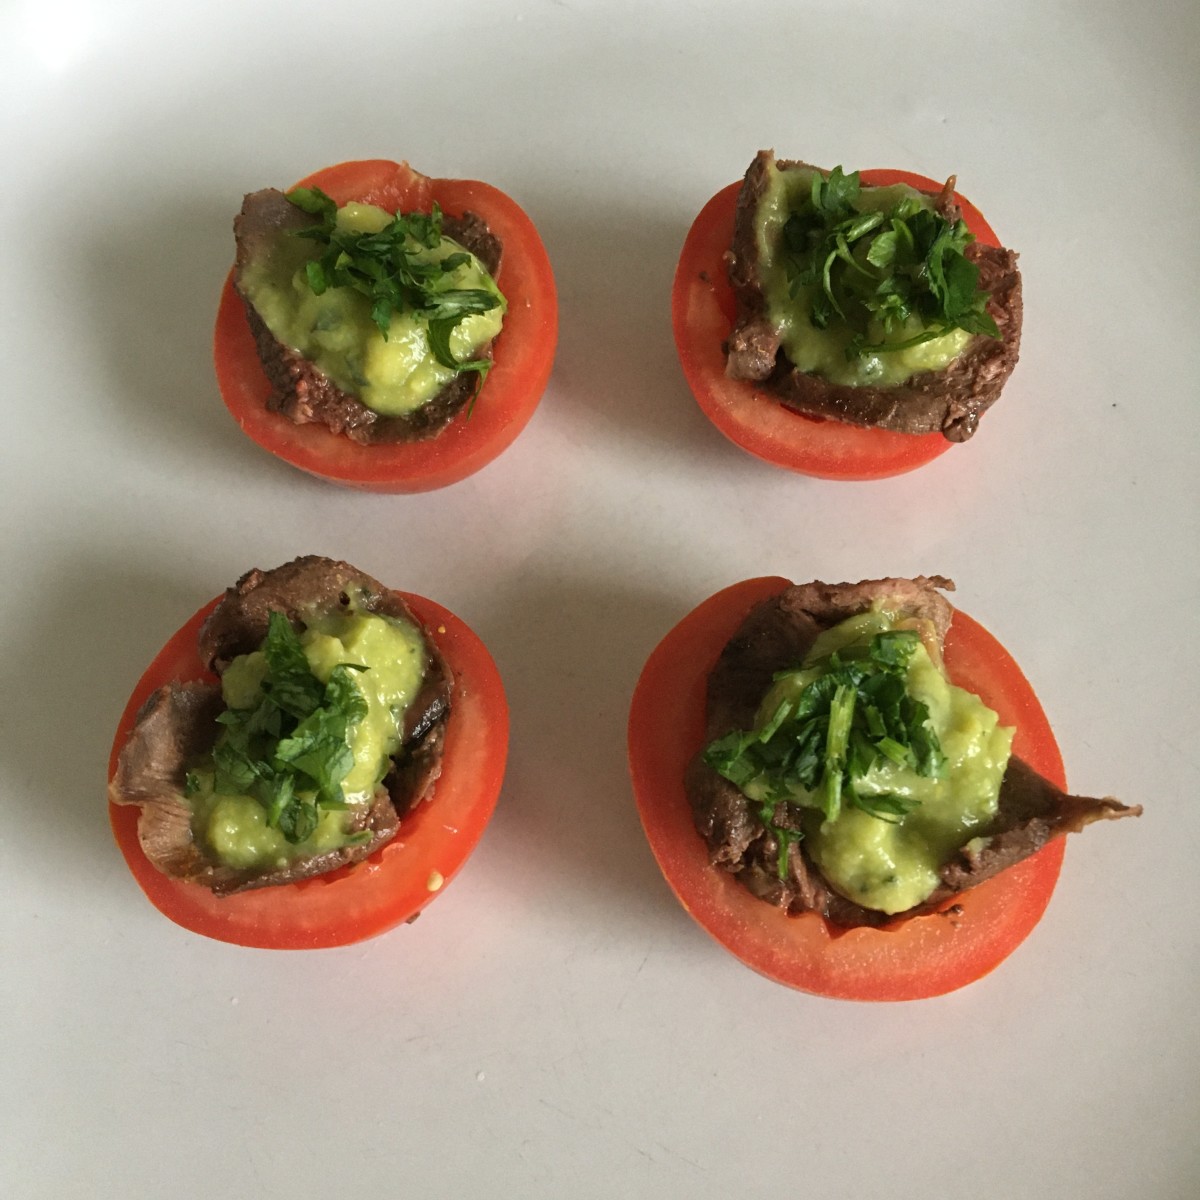 Tomato halves stuffed with chilli spiced pigeon and guacamole